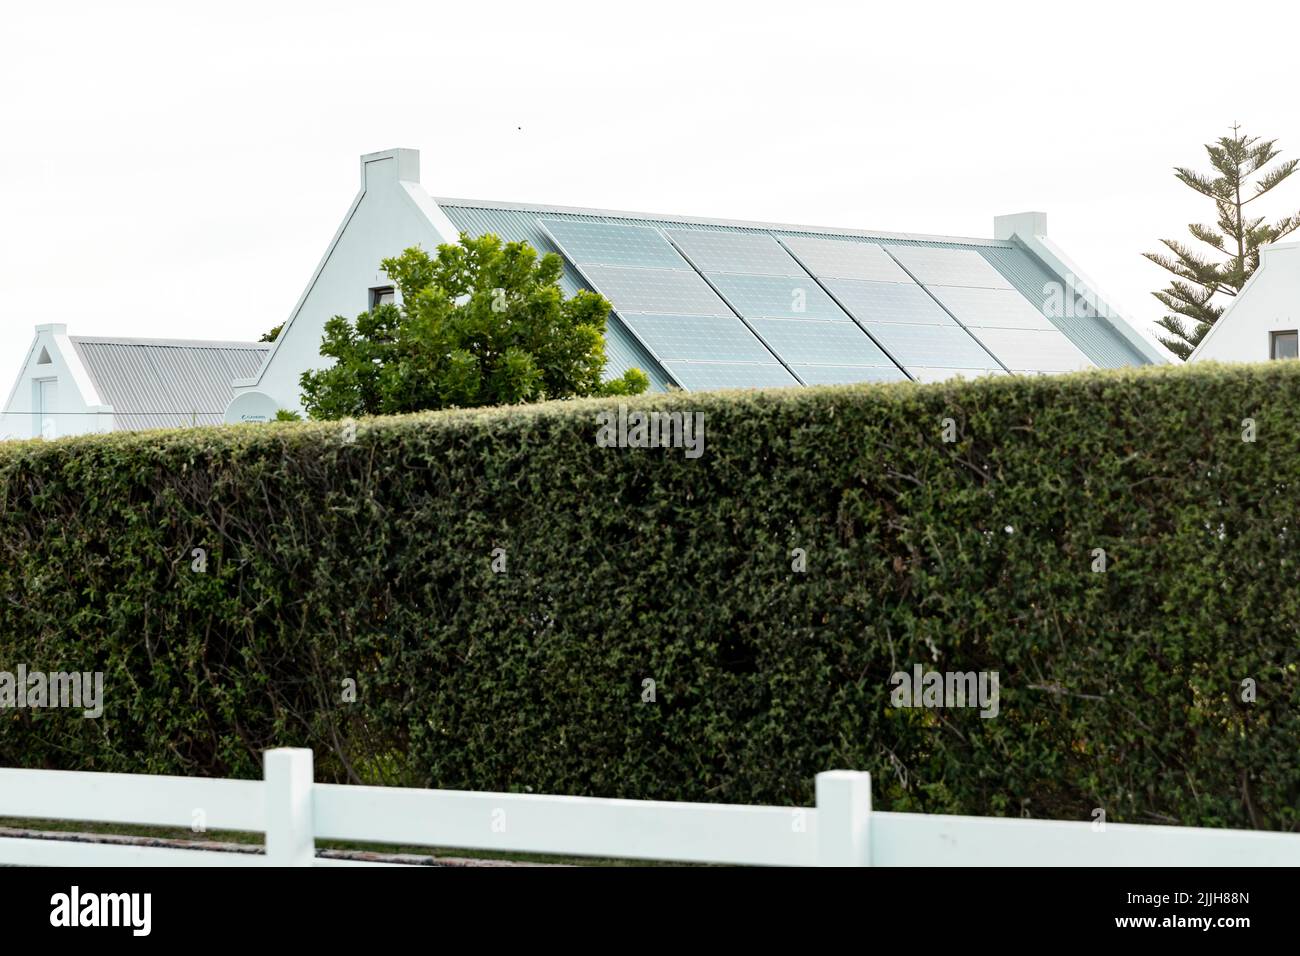 Green plants fence with solar panels on rooftop of houses in background against clear sky Stock Photo